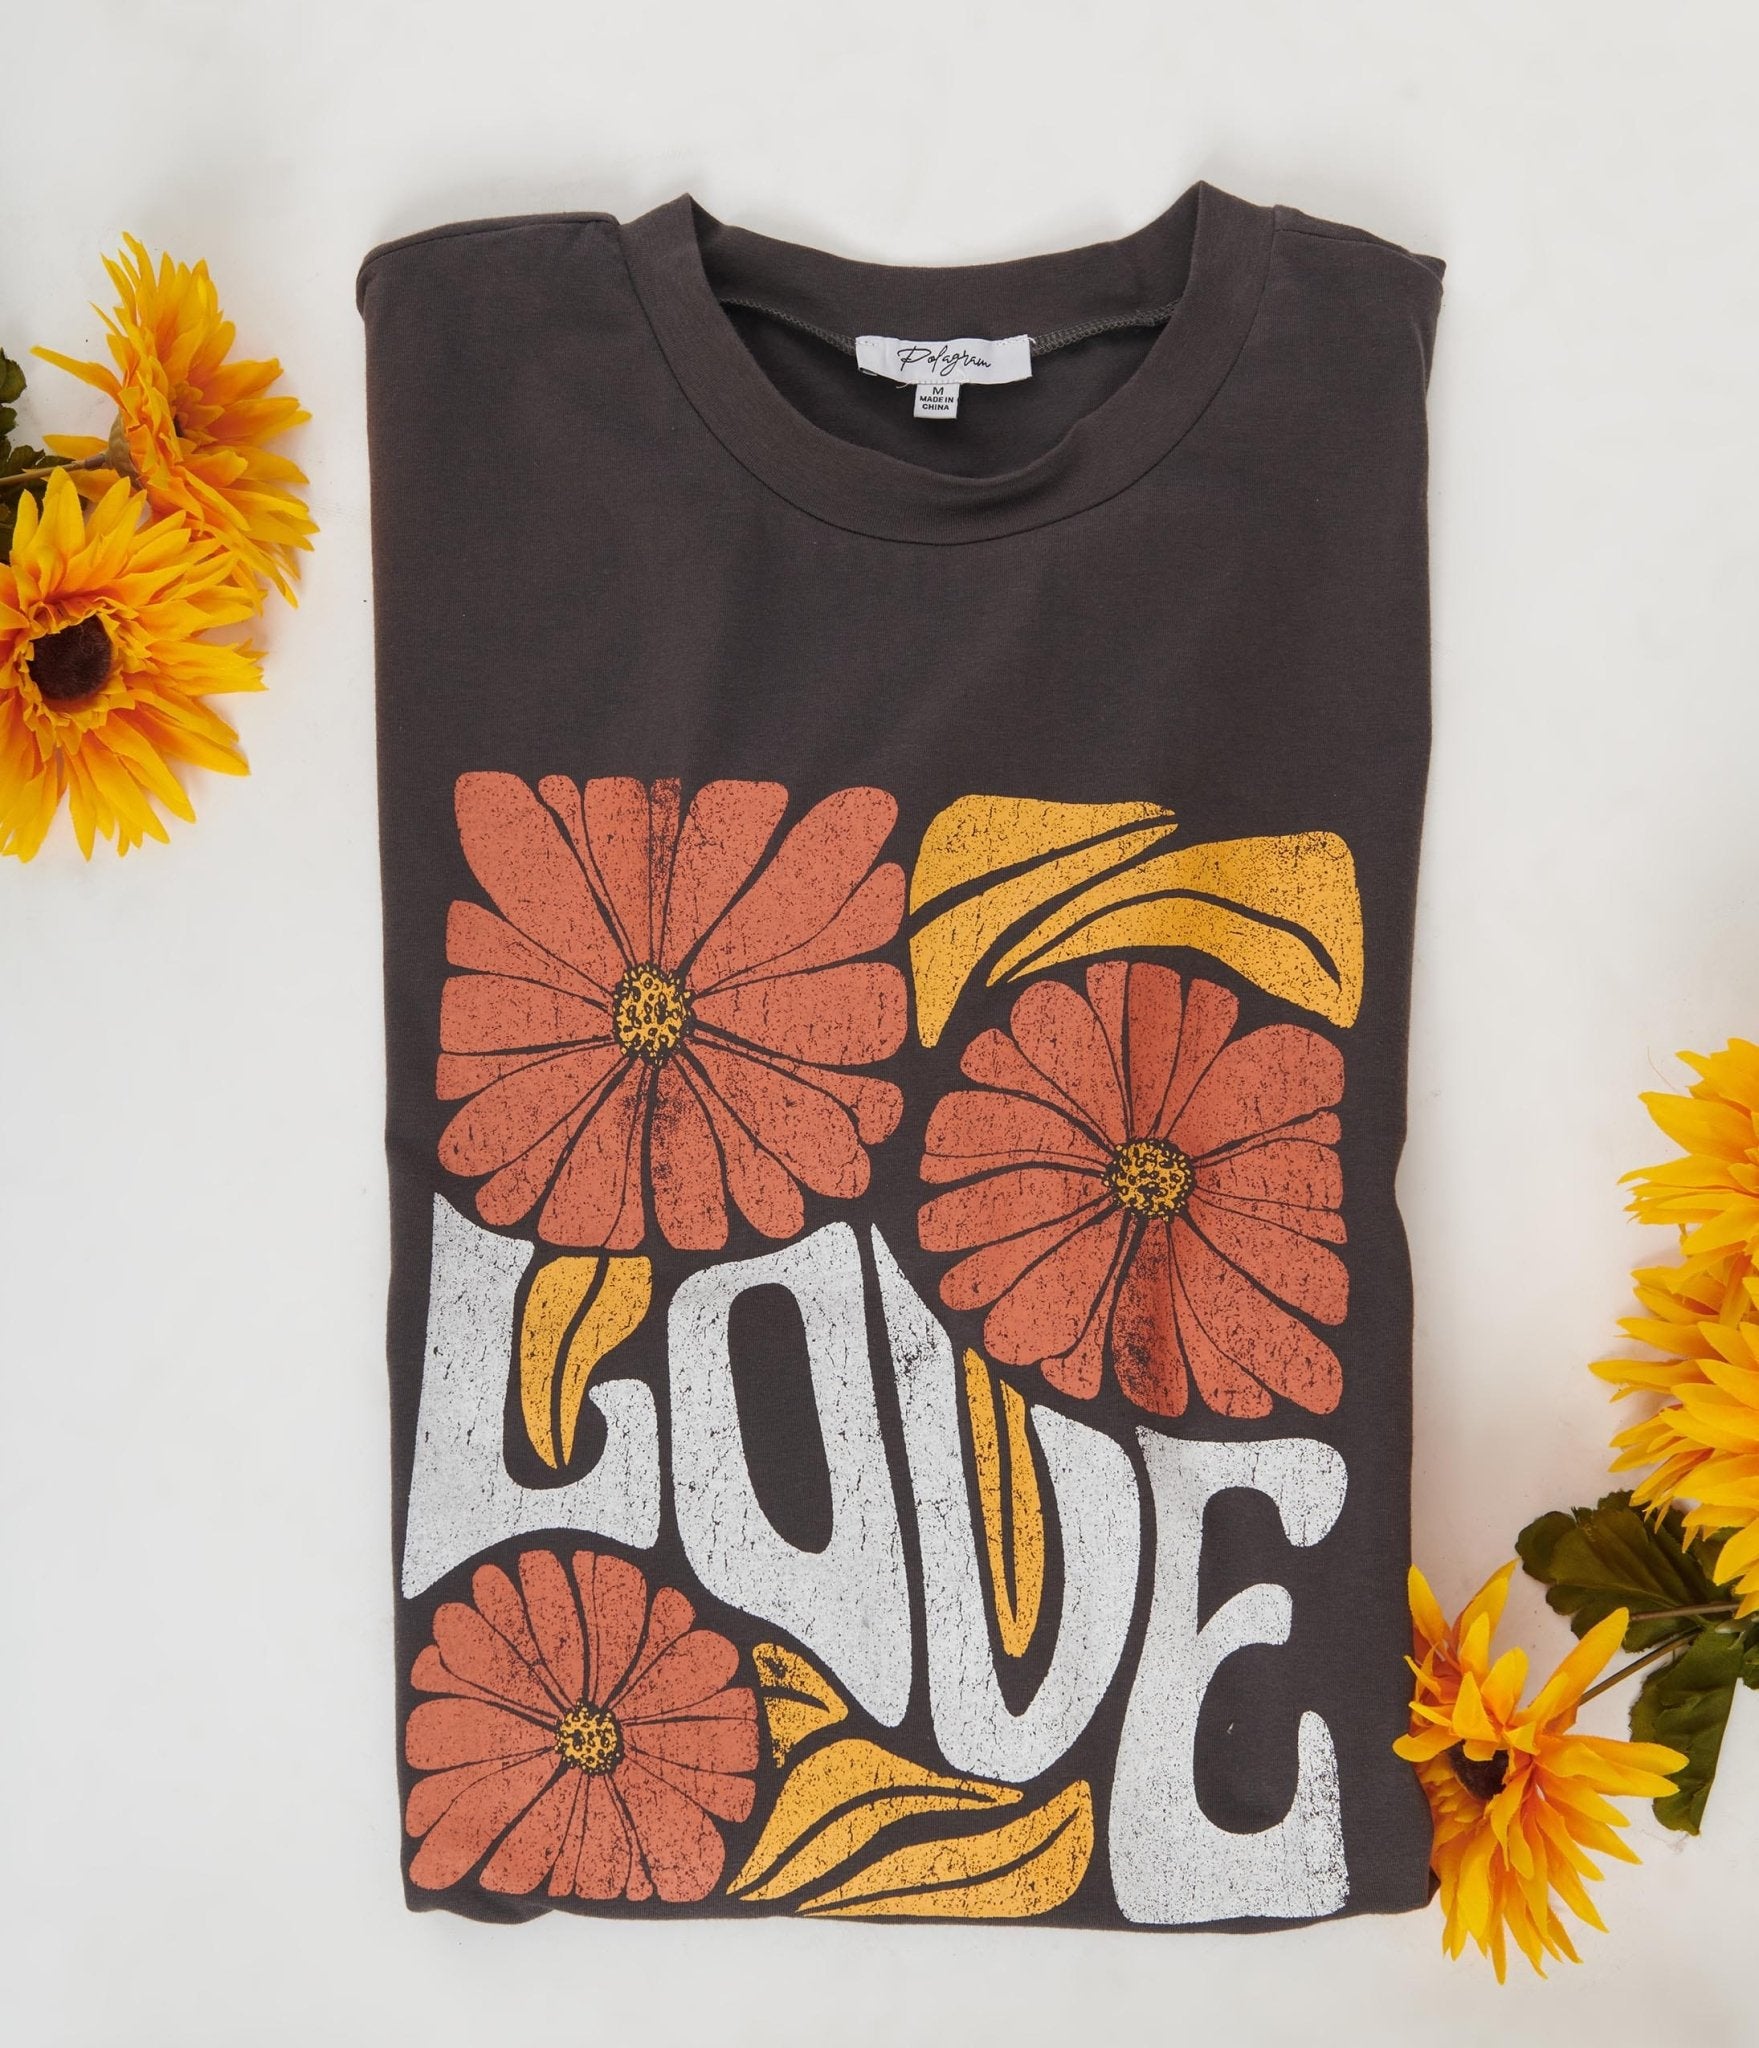 Grey Floral Love Unisex Graphic Tee - Unique Vintage - Womens, GRAPHIC TEES, TEES